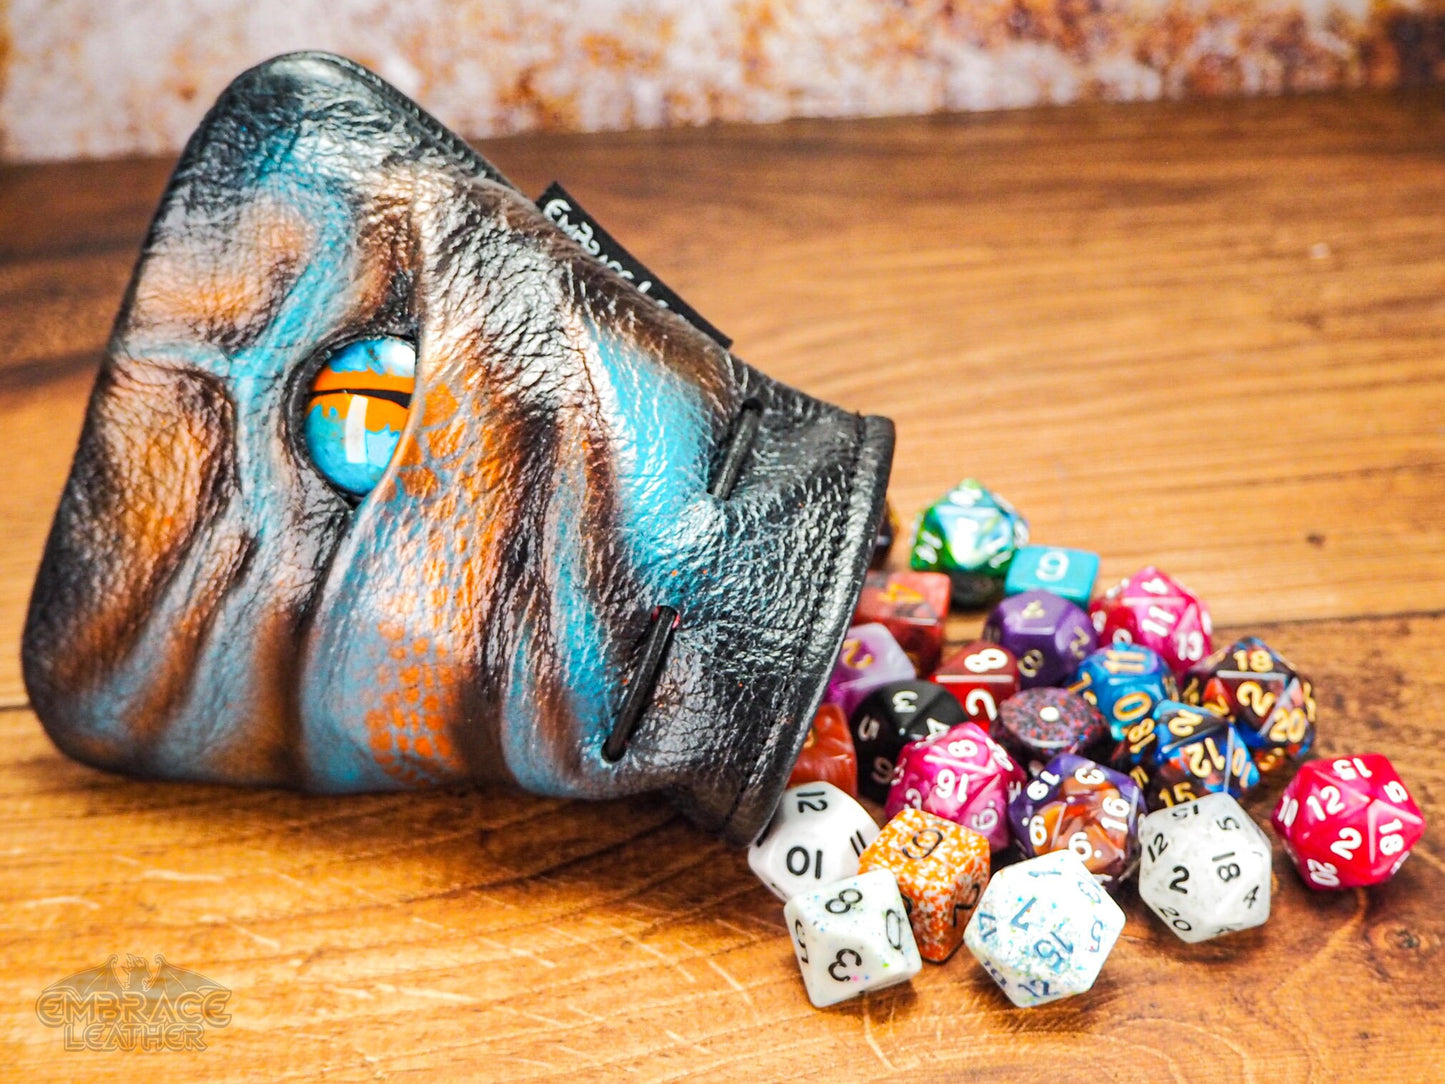 Unique Dragon Eye Dice Bag for Tabletop Gaming and Dice Collectors - Hand Painted Leather Pouch for 45 Dice - Great Gift for Gamers